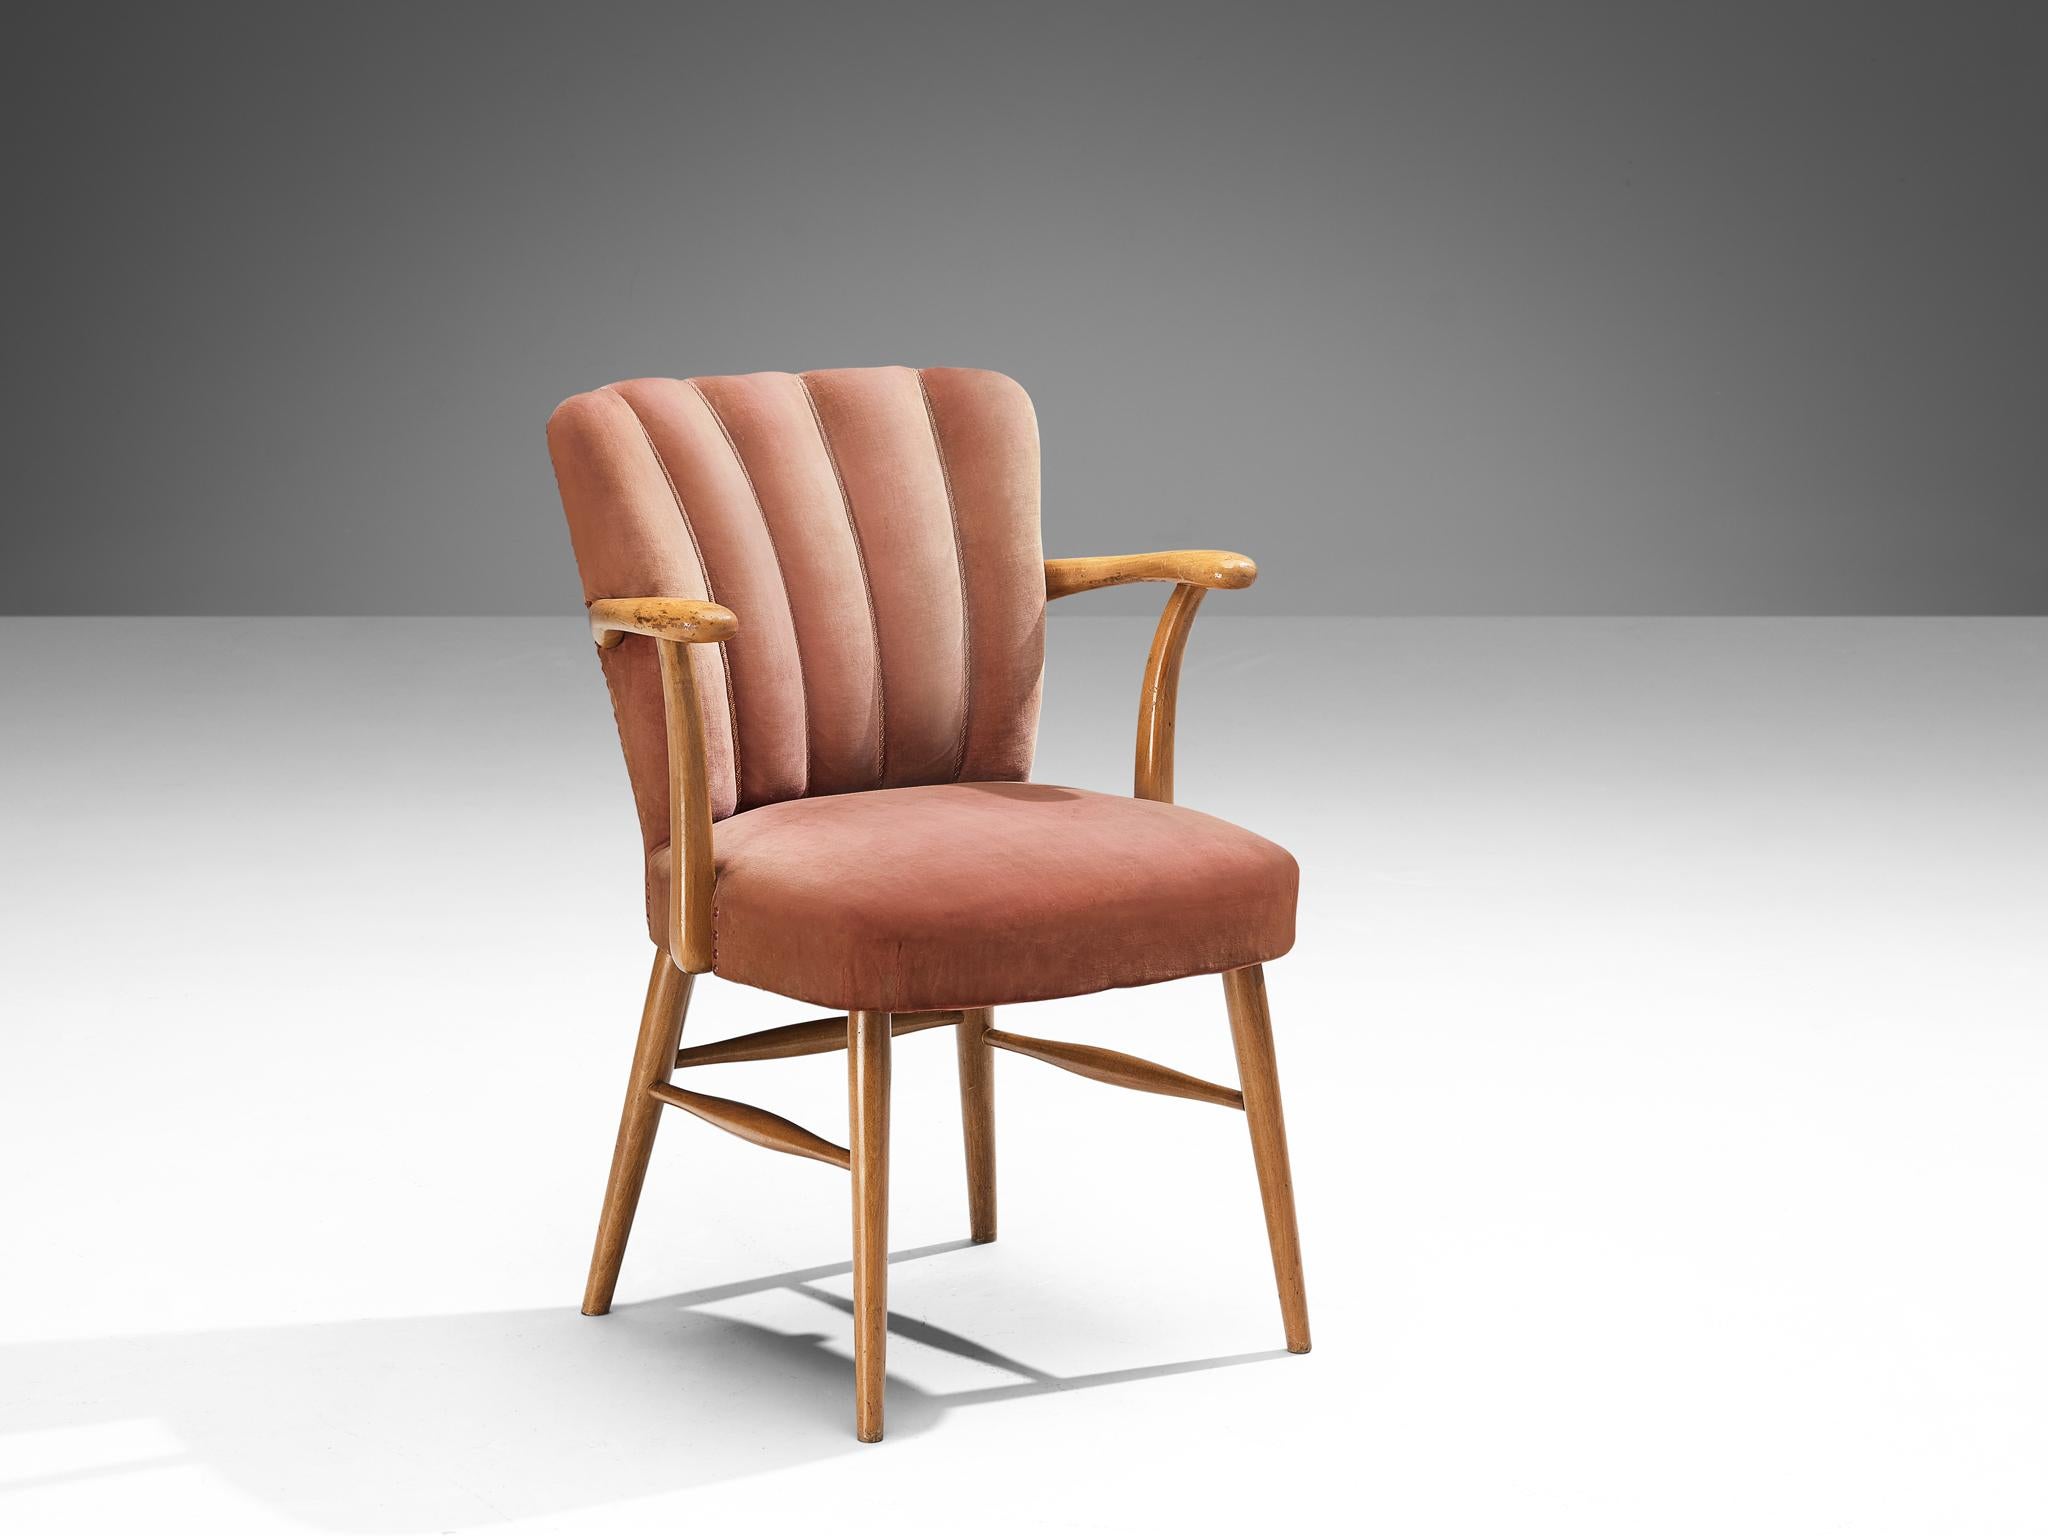 Armchair, velvet, beech, brass, Europe, 1950s

Elegant armchair in a soft pink velvet upholstery. A beech frame with armrests holds the seat and backrest that is highlighted with vertical lines ending in soft curves on top. The tufted lines